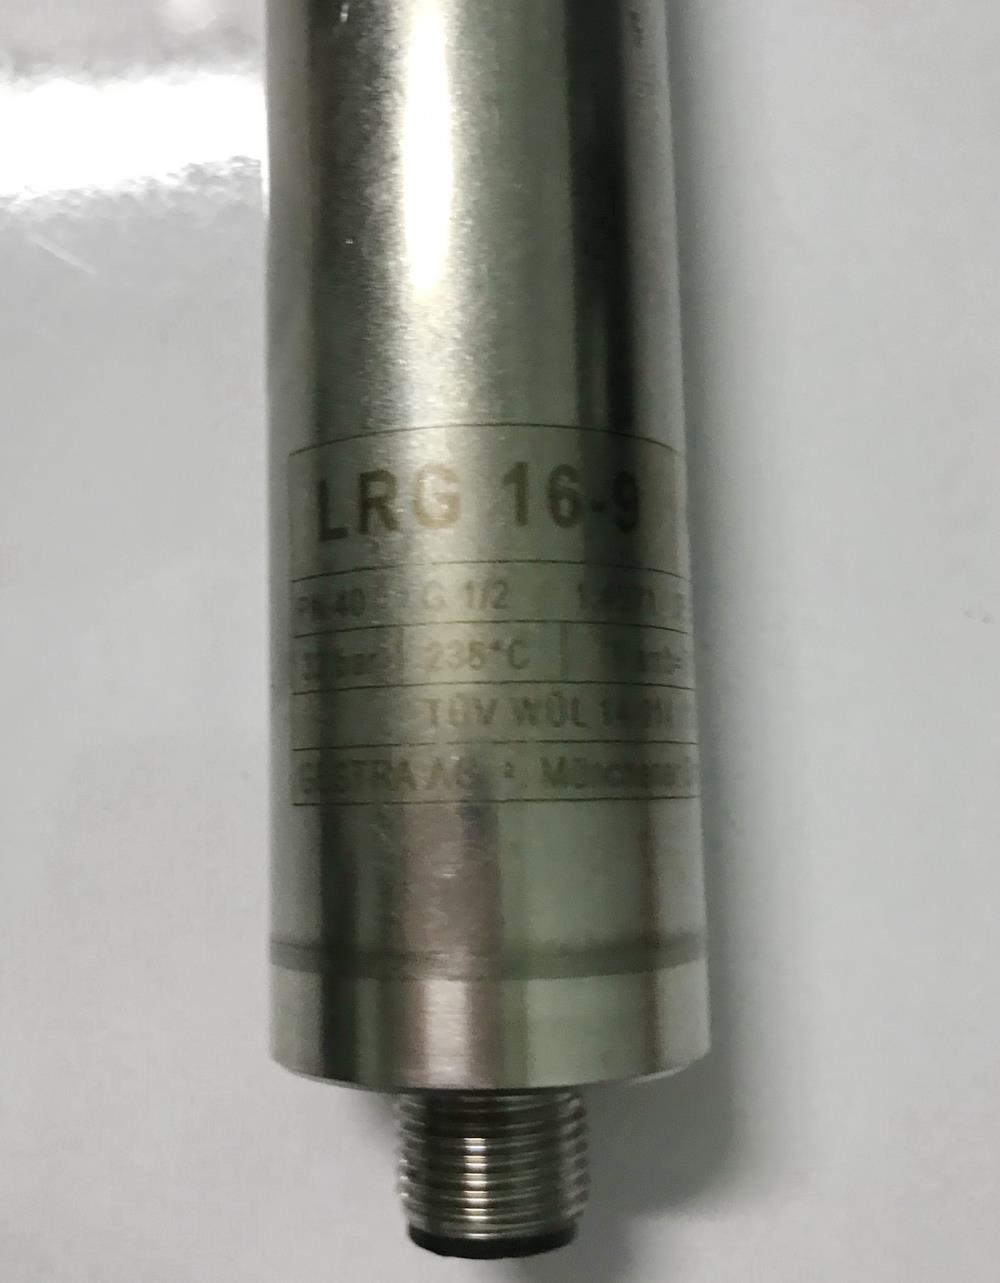 Gestra LRG Level Electrode,Level Conductivity Electrode , Probe Electrode , Electrode Sensor , Temperature Control, Probe Sensor, Temperature Transmtter, LRG , Gestra , Temperature Transducer, Two-wire Transmitter,Gestra,Instruments and Controls/Probes